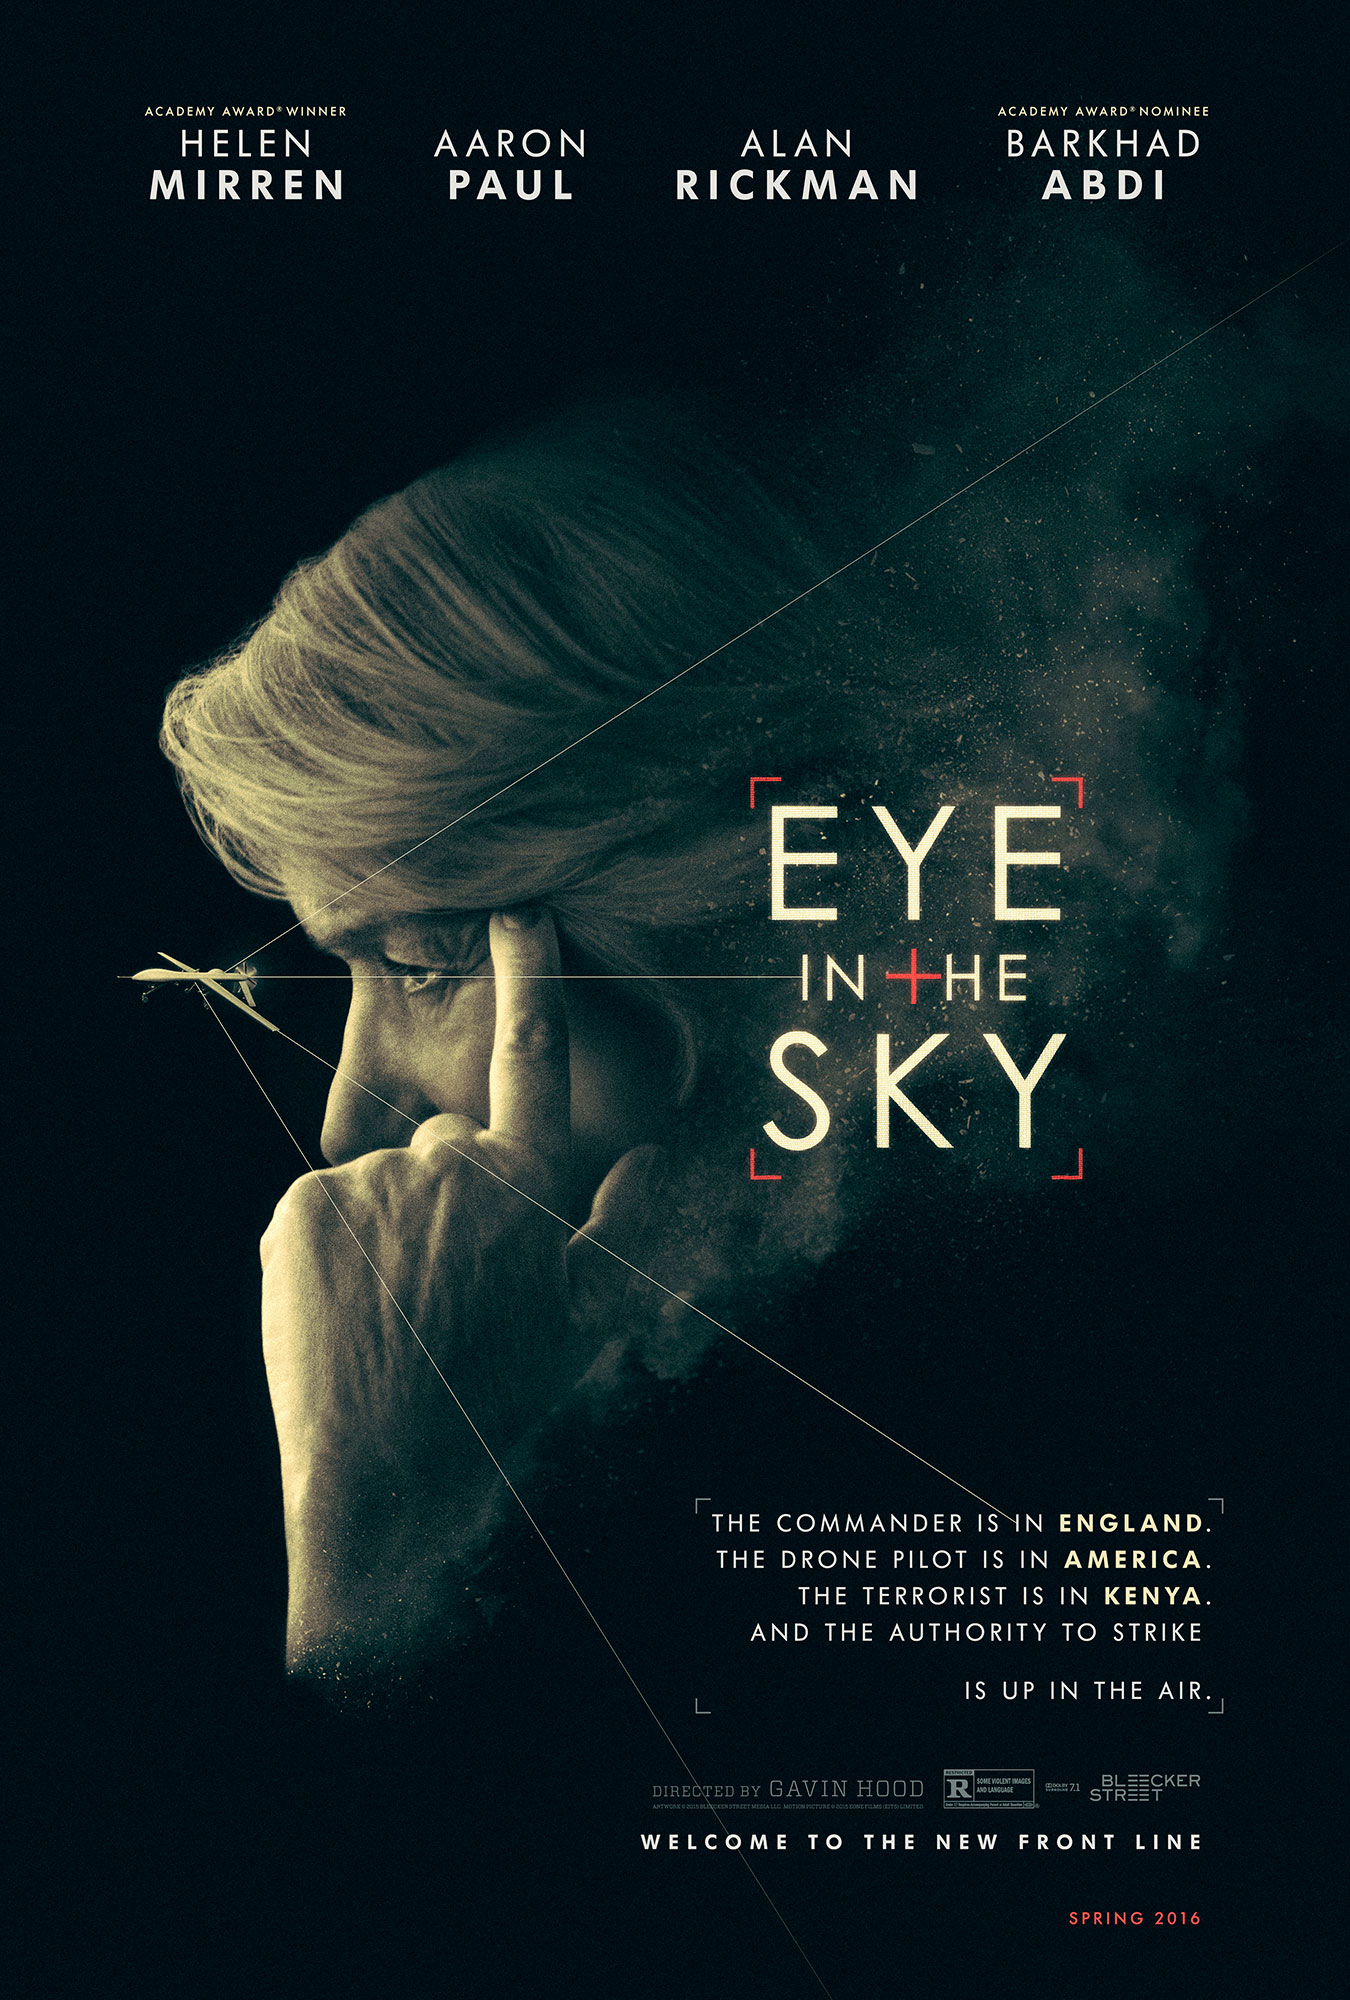 eye-in-the-sky-movie-poster-images